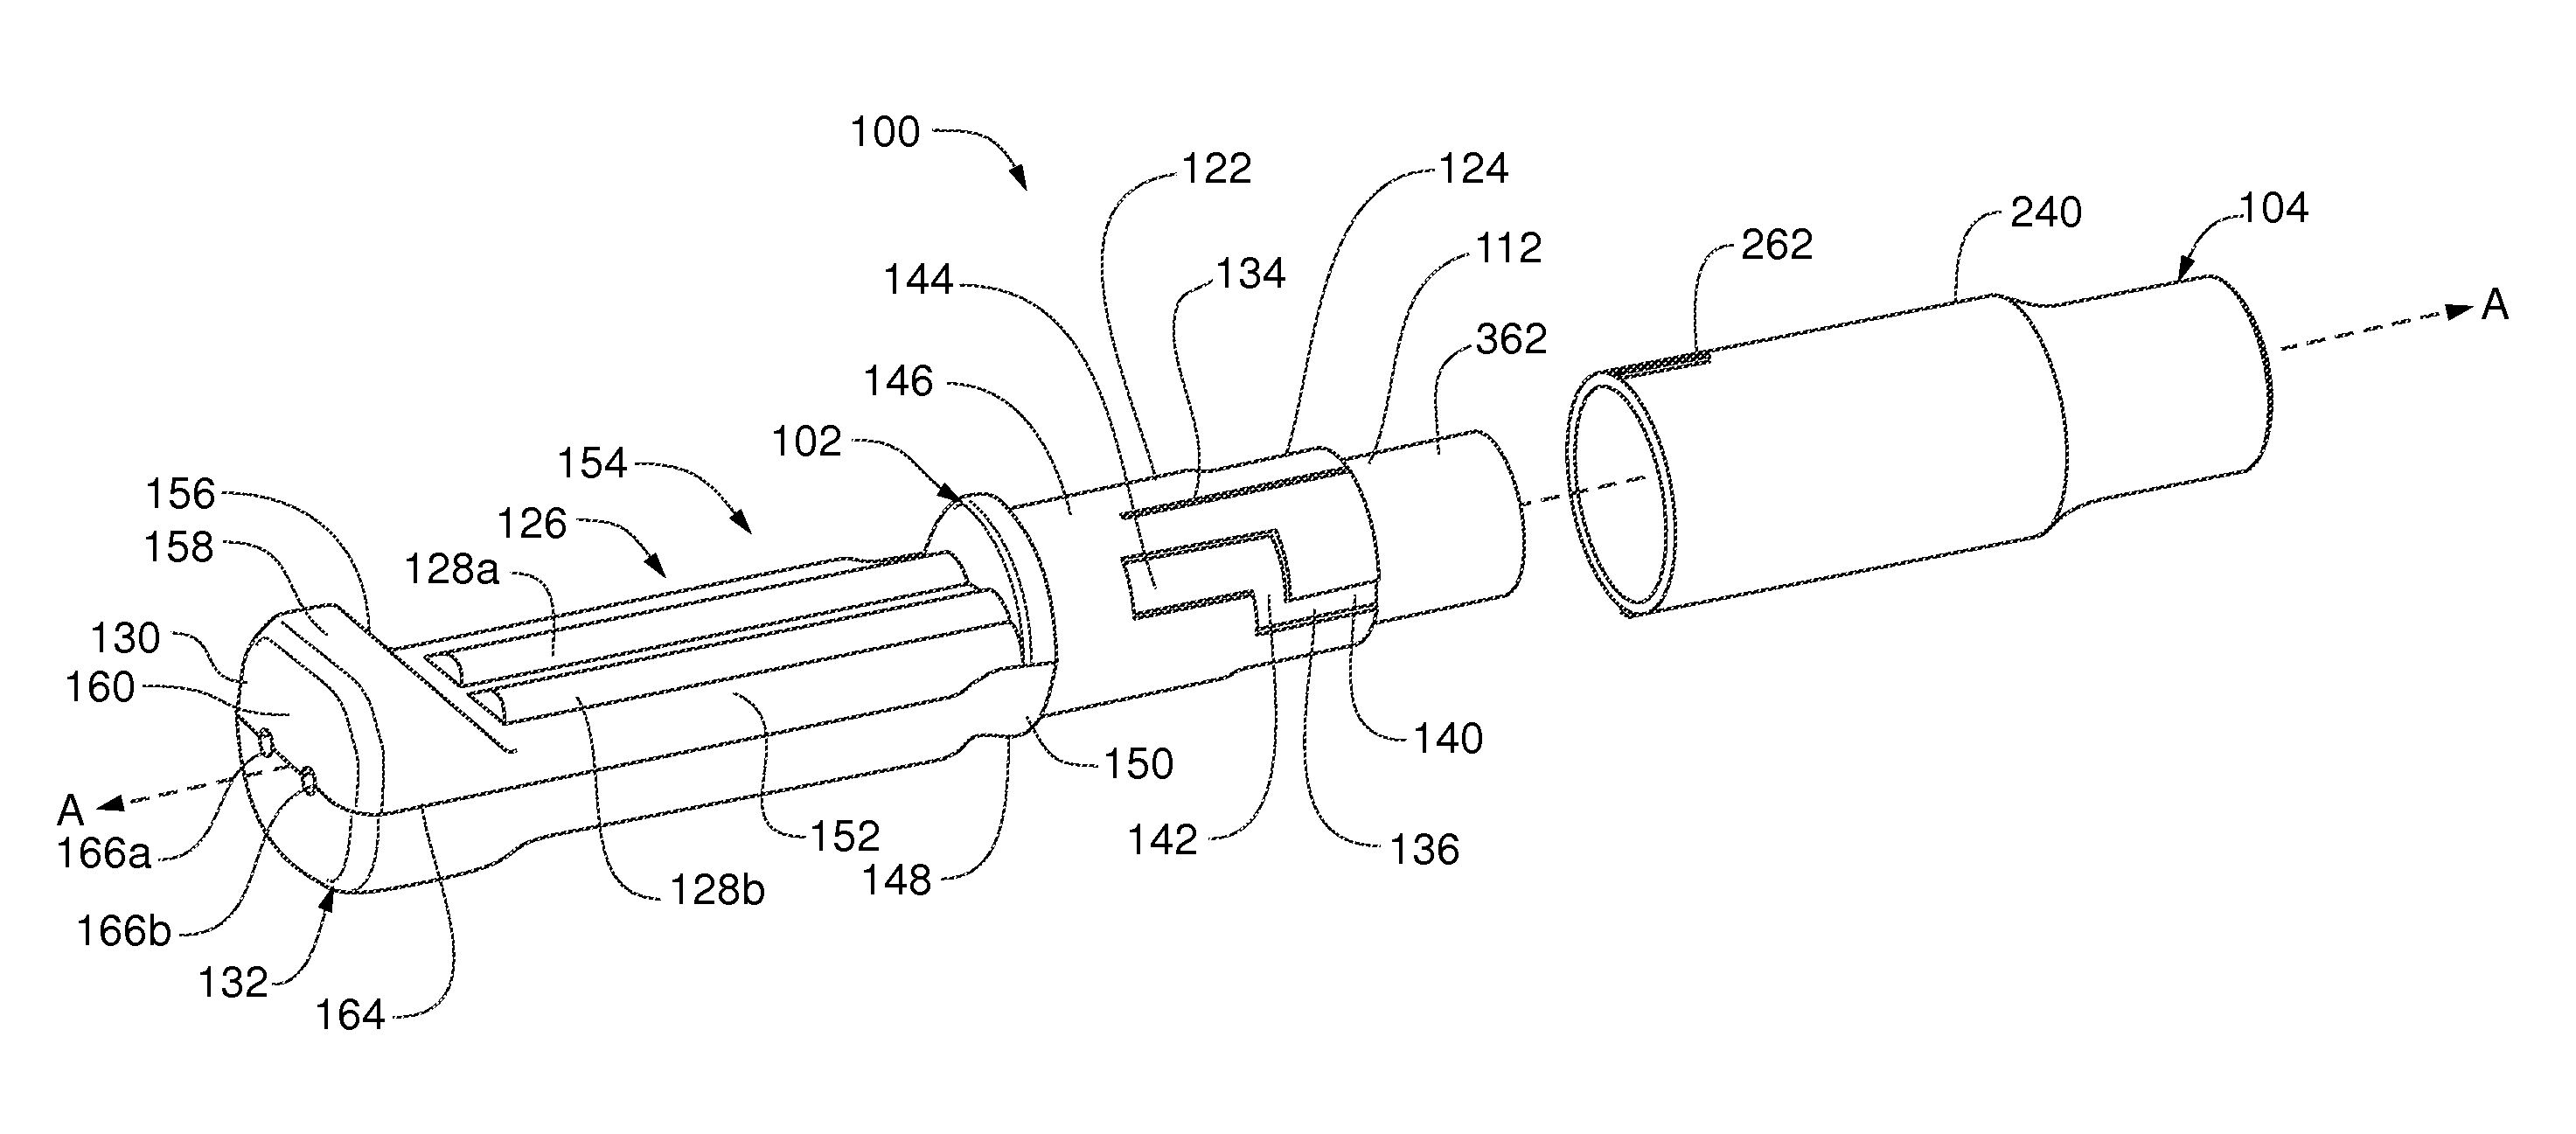 Multi-stage oral-fluid testing device